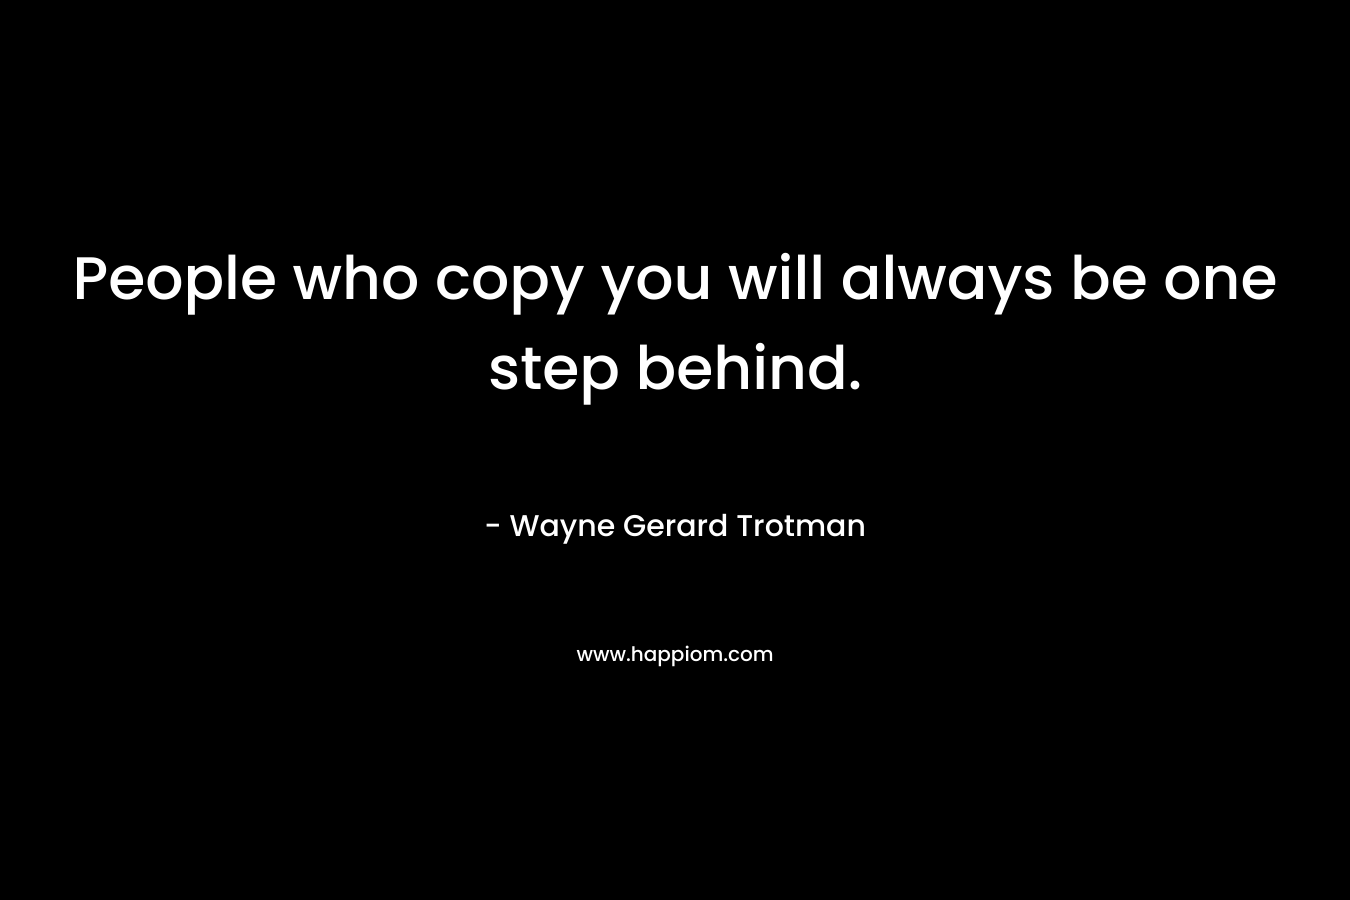 People who copy you will always be one step behind.